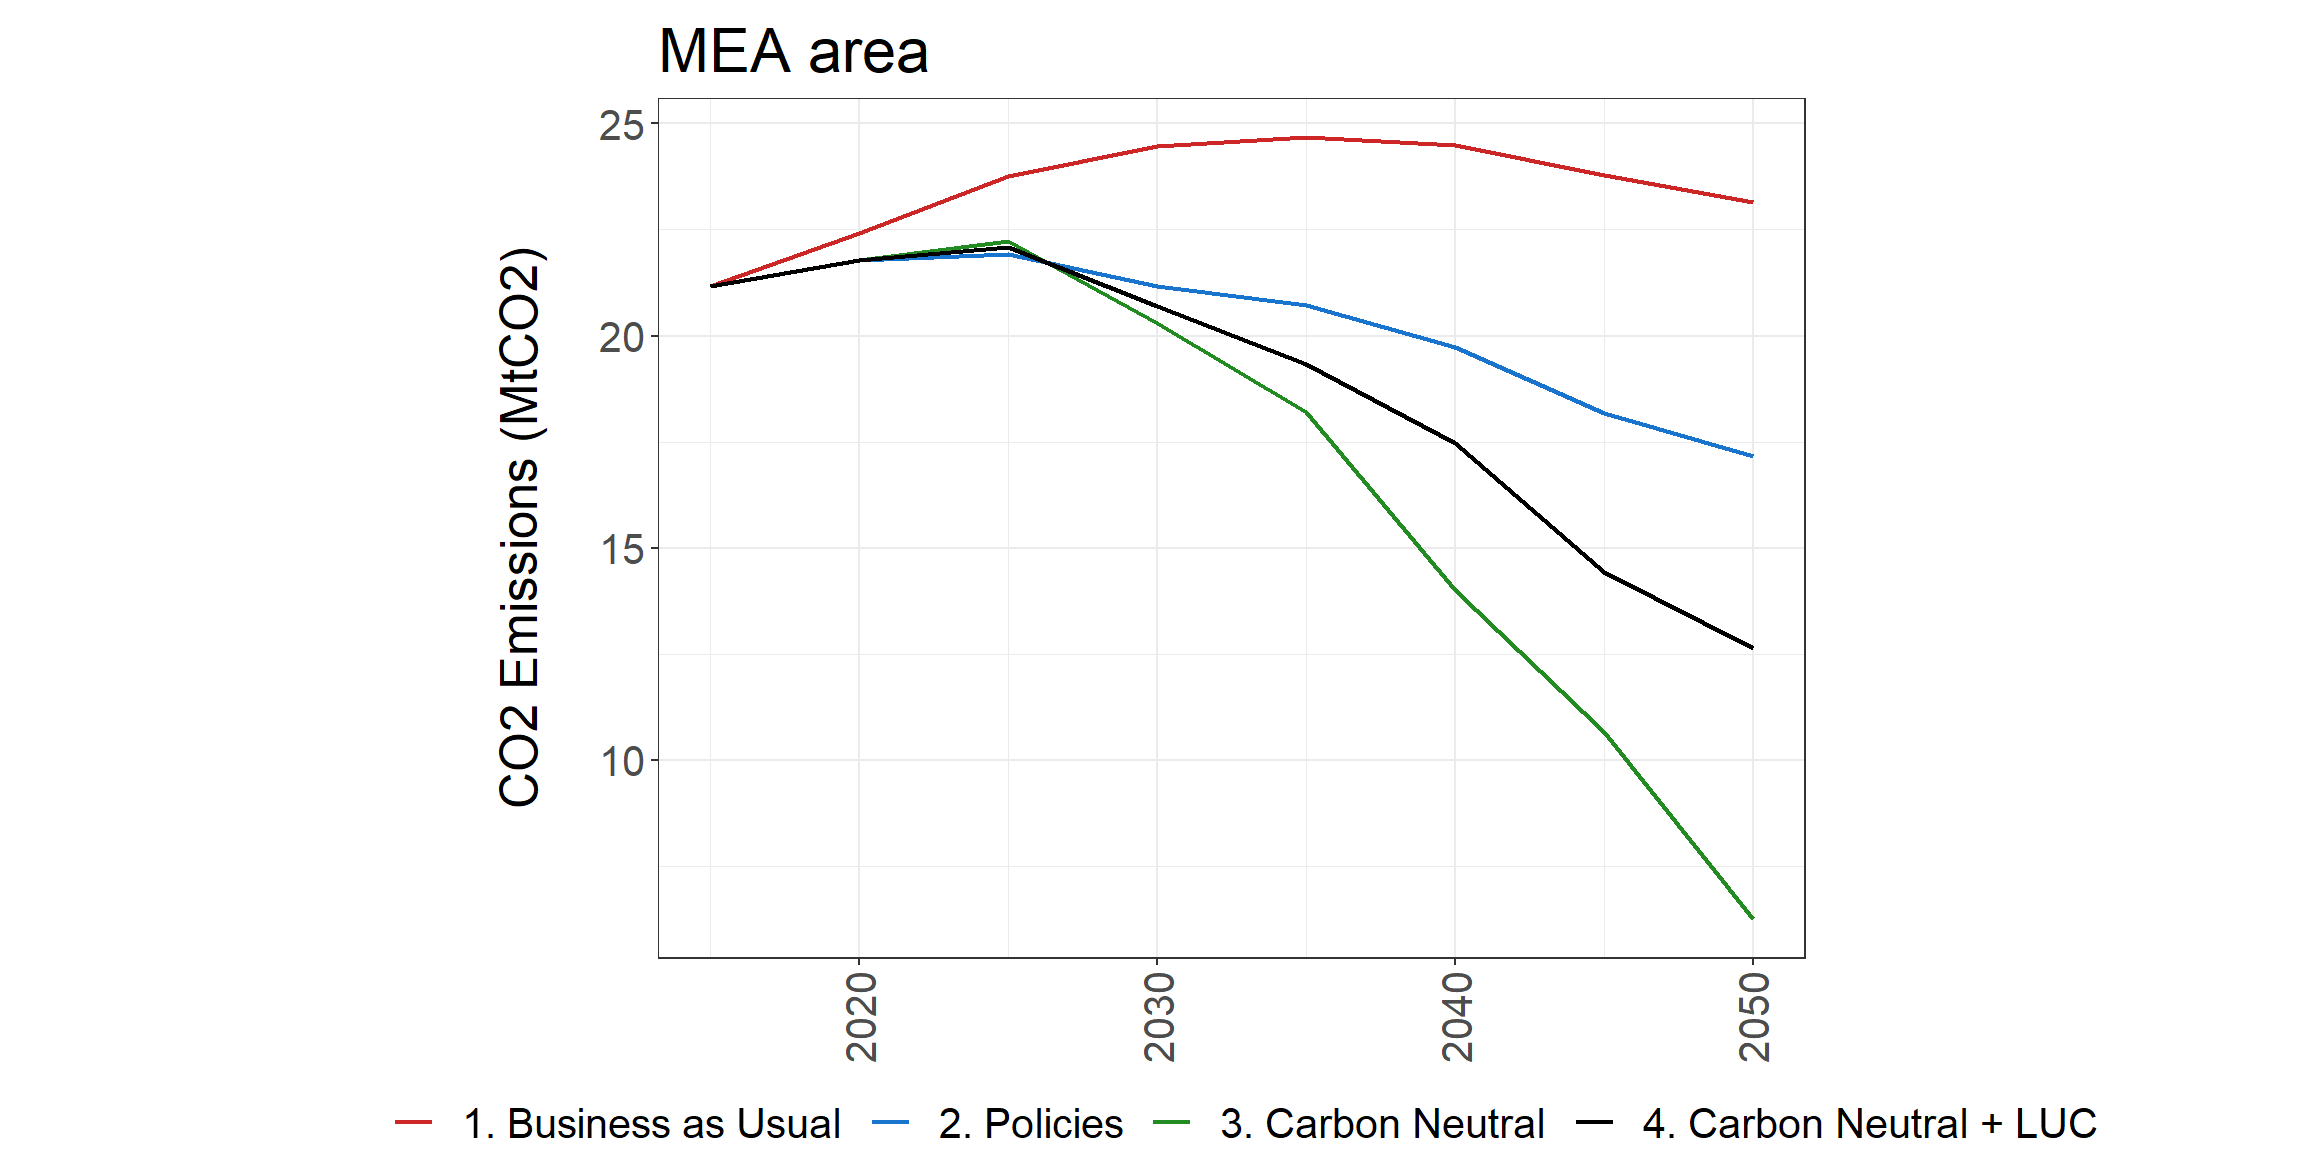 Total MEA area CO2 emissions (left) and GHG emissions (right) in the reference scenario and the low and high policies scenarios